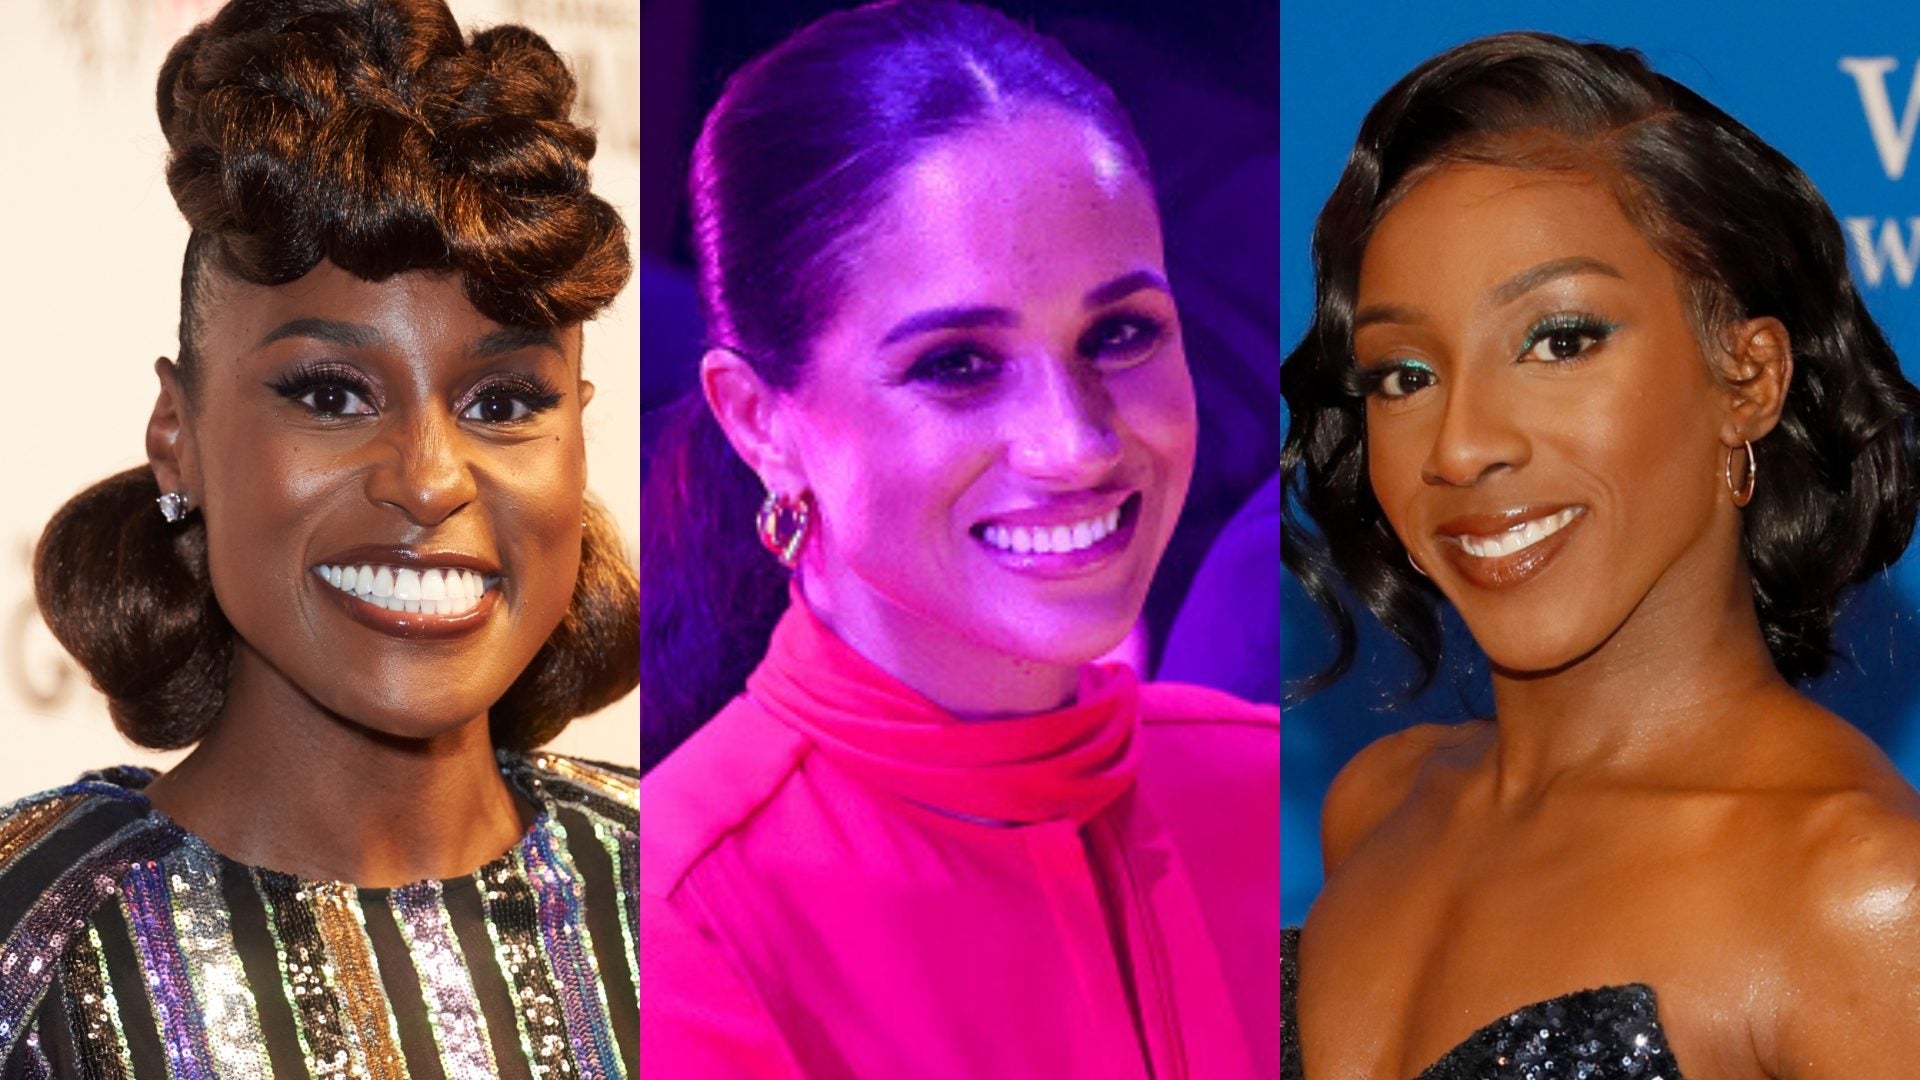 Issa Rae And Ziwe Discuss The ‘Angry Black Woman’ Stereotype On Meghan Markle’s Podcast